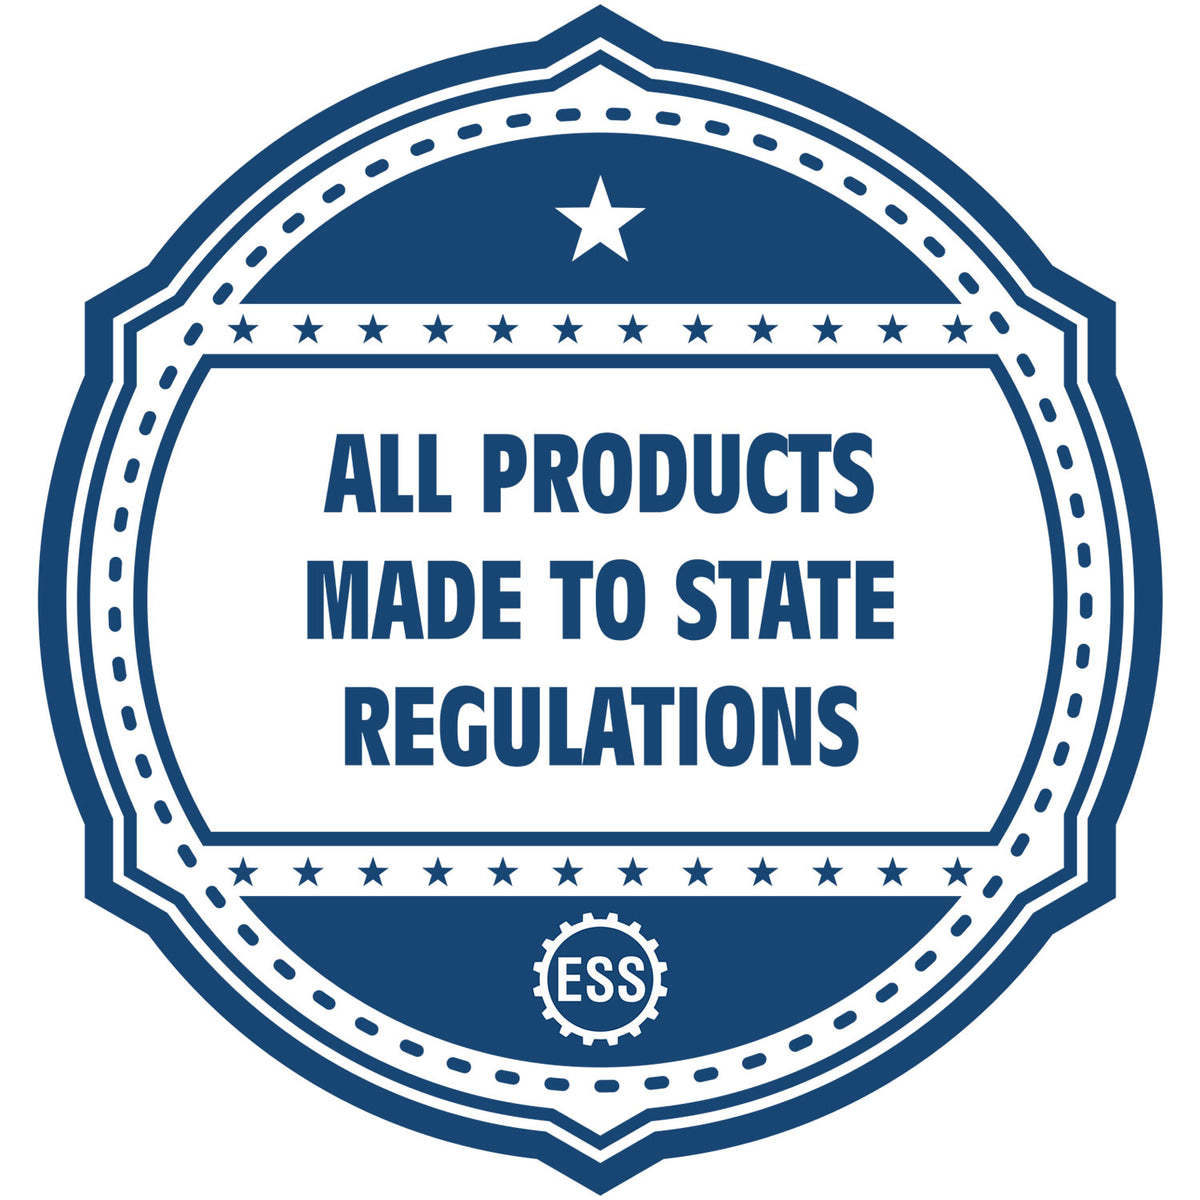 An icon or badge element for the Heavy Duty Cast Iron District of Columbia Architect Embosser showing that this product is made in compliance with state regulations.